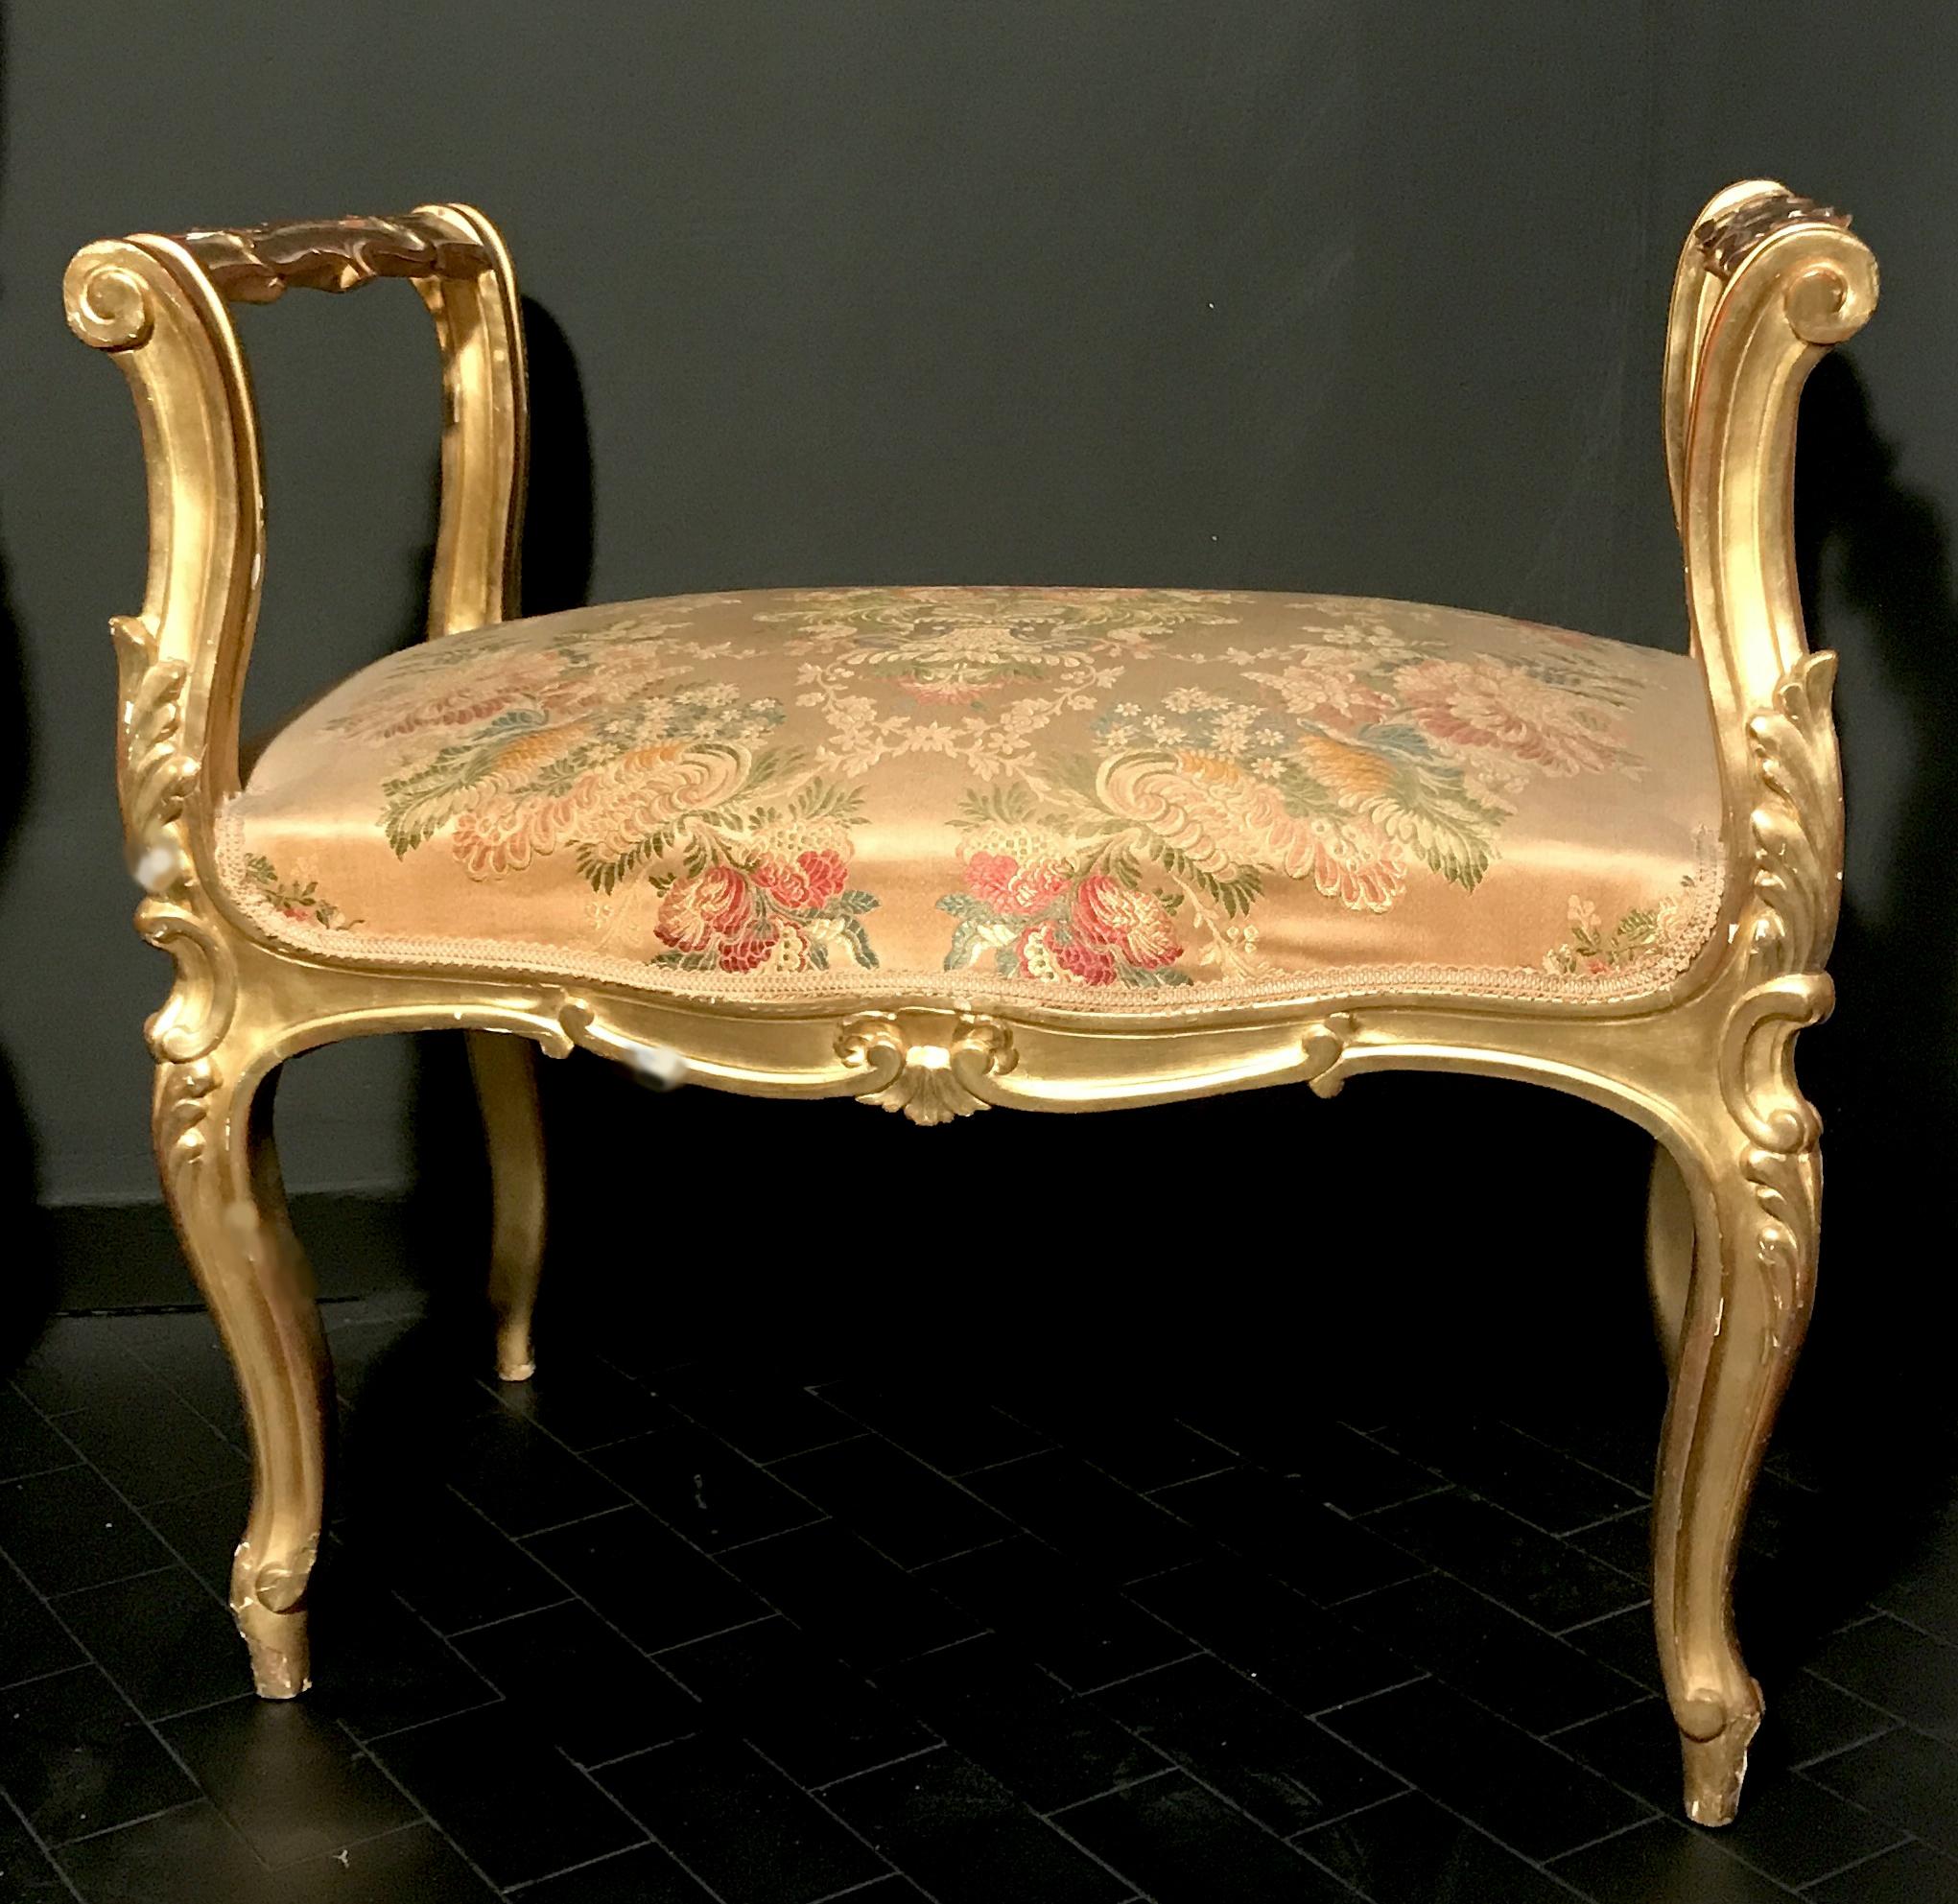 This extraordinary and finely carved benches with original gilding.
It's part of an eleven piece s salon set published 1stDibs Reference #:
LU985910554043
Provenience from a Sicilian Aristocratic residence
Sofa measurements:
Height 70
Width 74